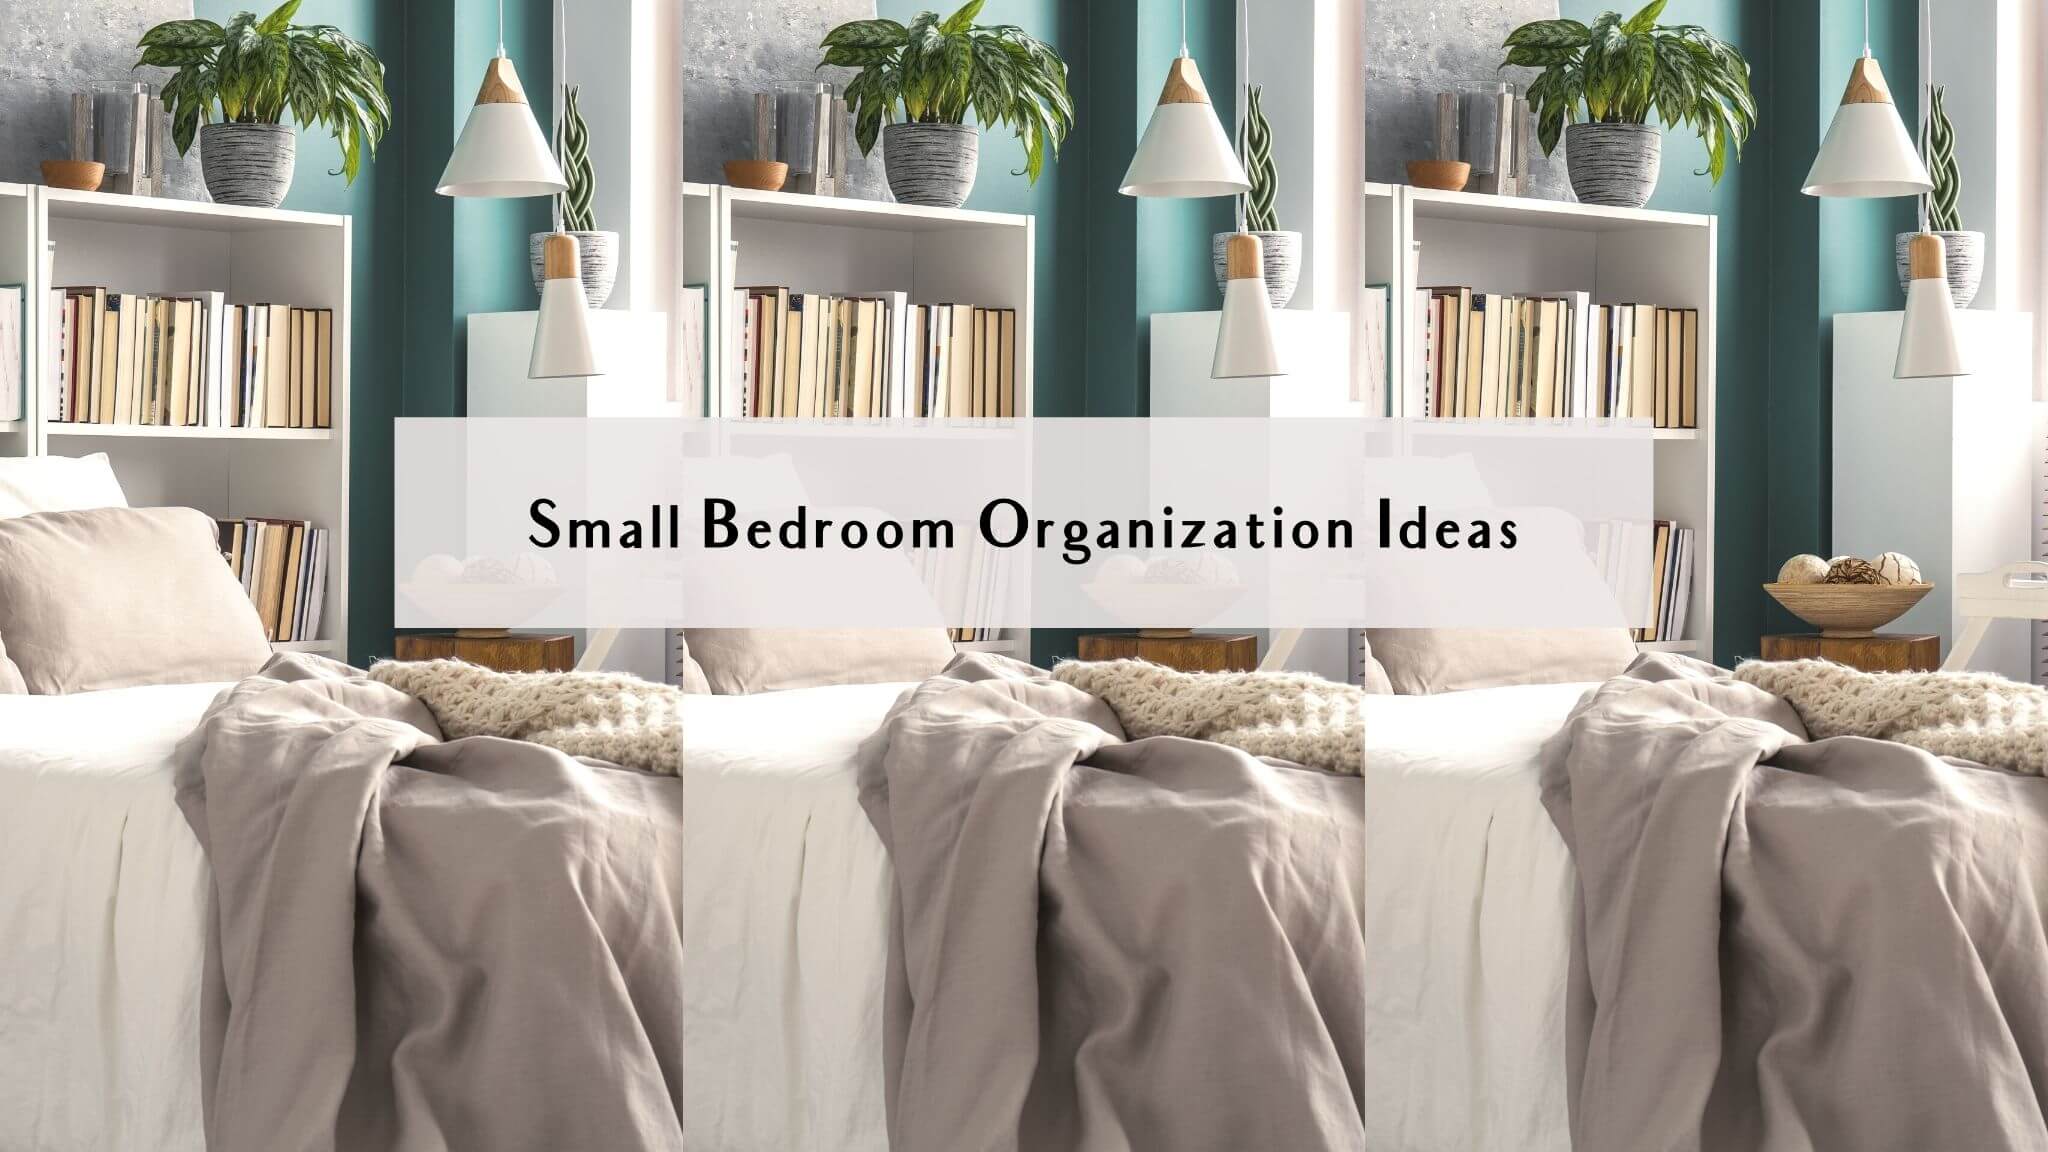 How To Organize a Small Bedroom on a Budget